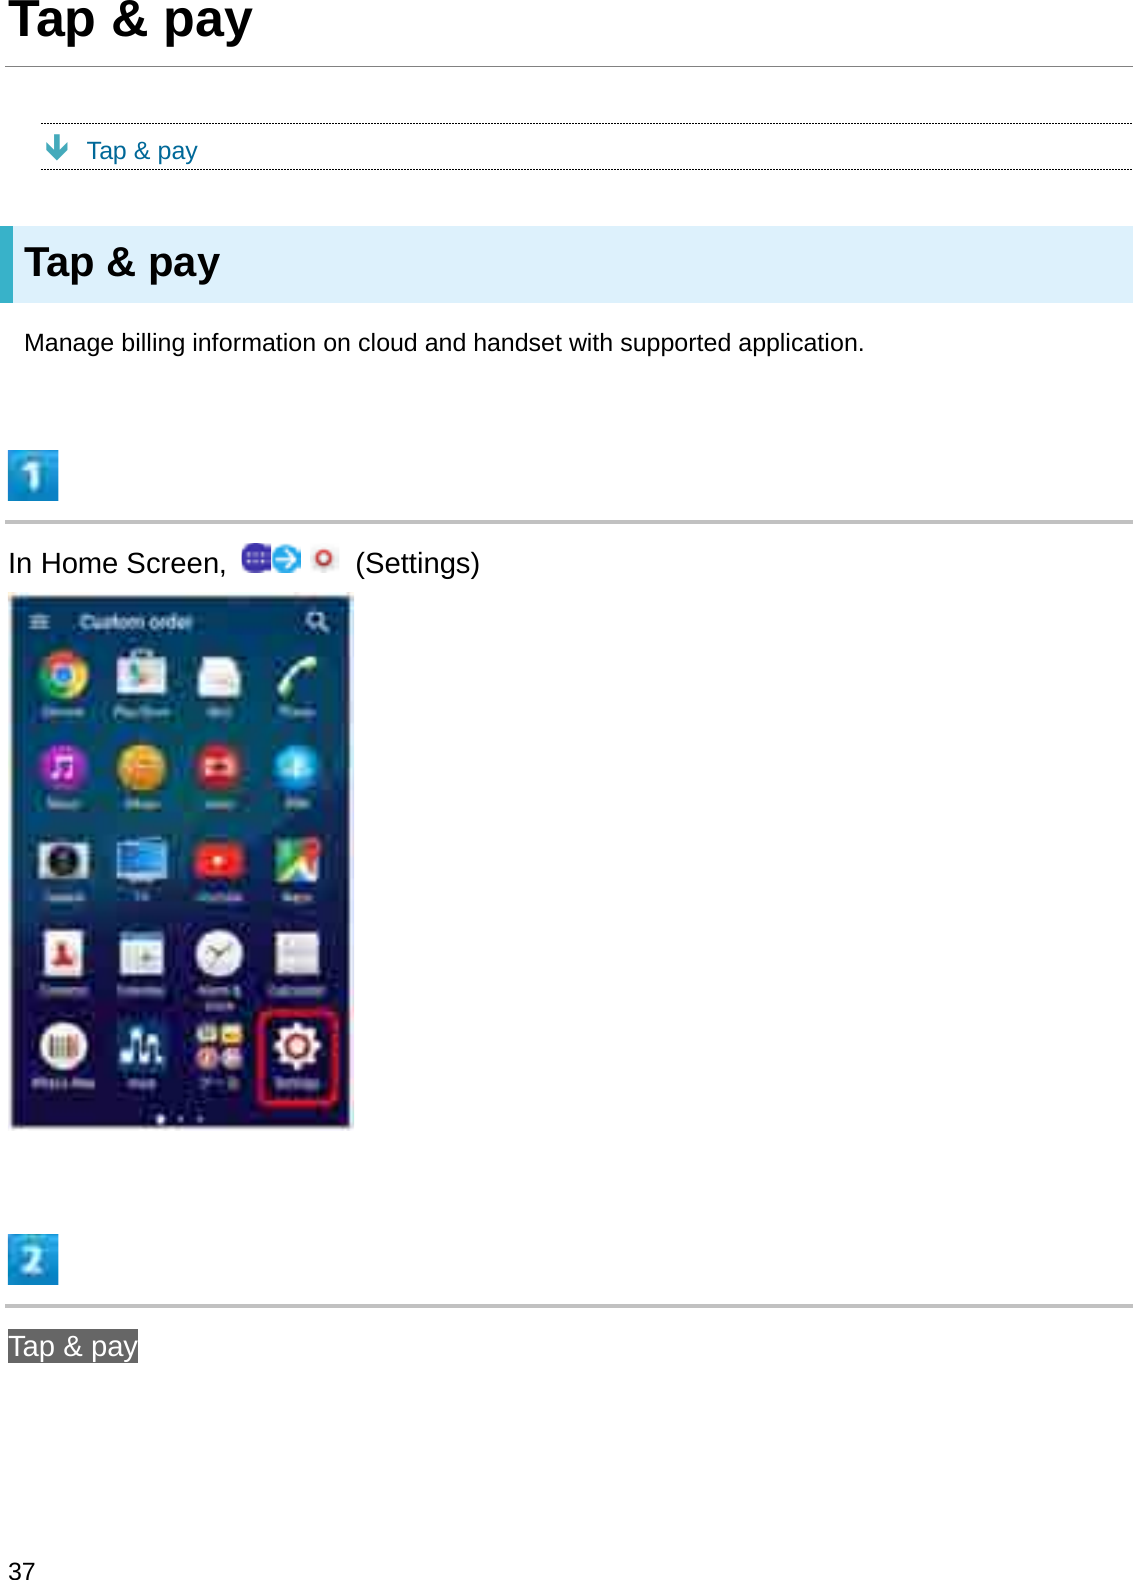 Tap &amp; payÐTap &amp; payTap &amp; payManage billing information on cloud and handset with supported application.In Home Screen,  (Settings)Tap &amp; pay37